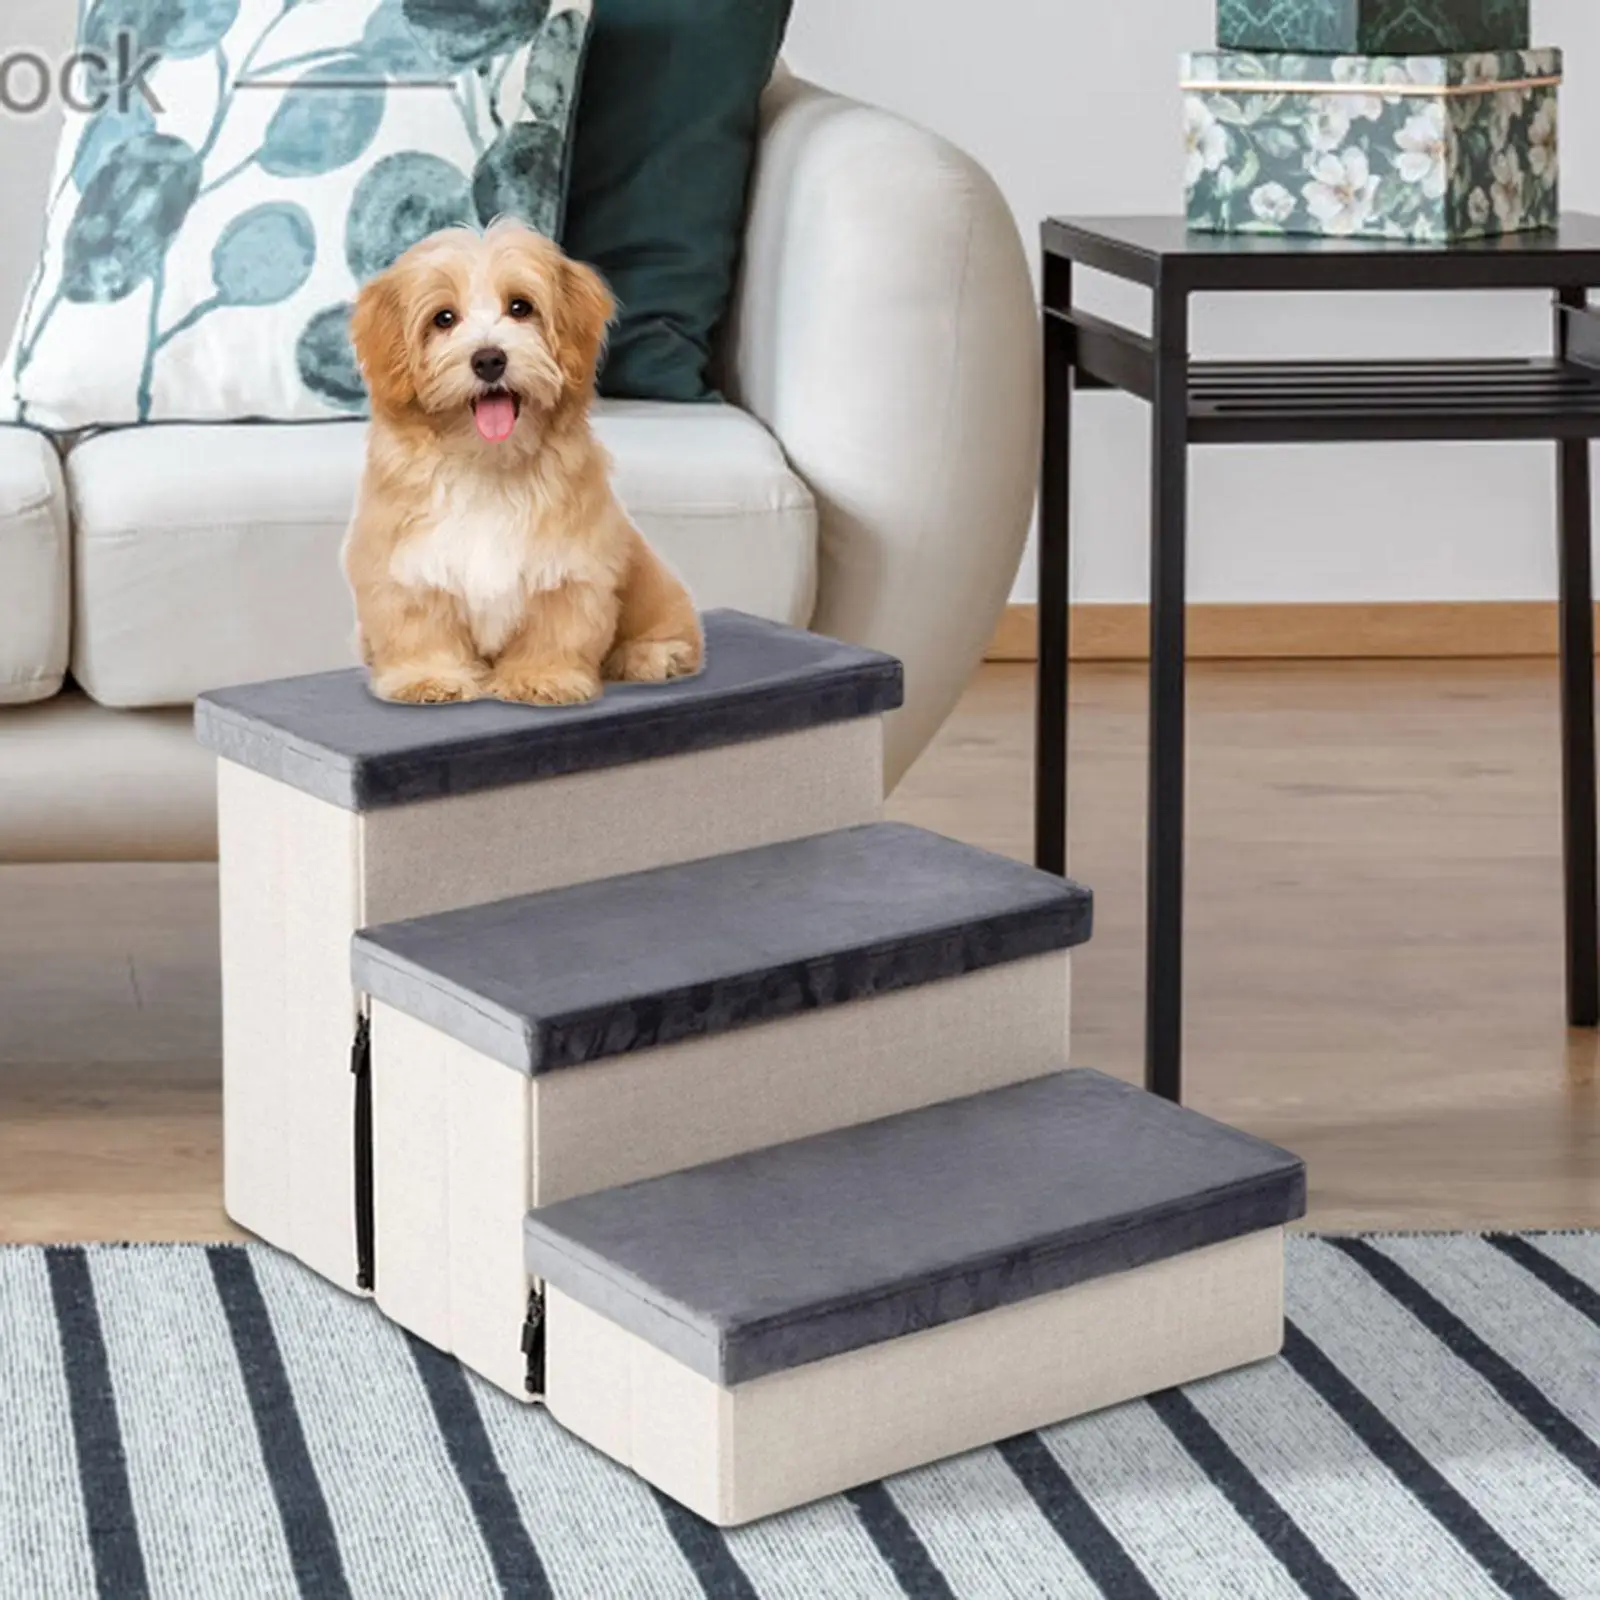 3 Tiers Pet Steps Dog Stairs Removable Cover Pet Climbing Ladder Portable Ramp Stairs with Storage Box for Sofa, Bed Indoor